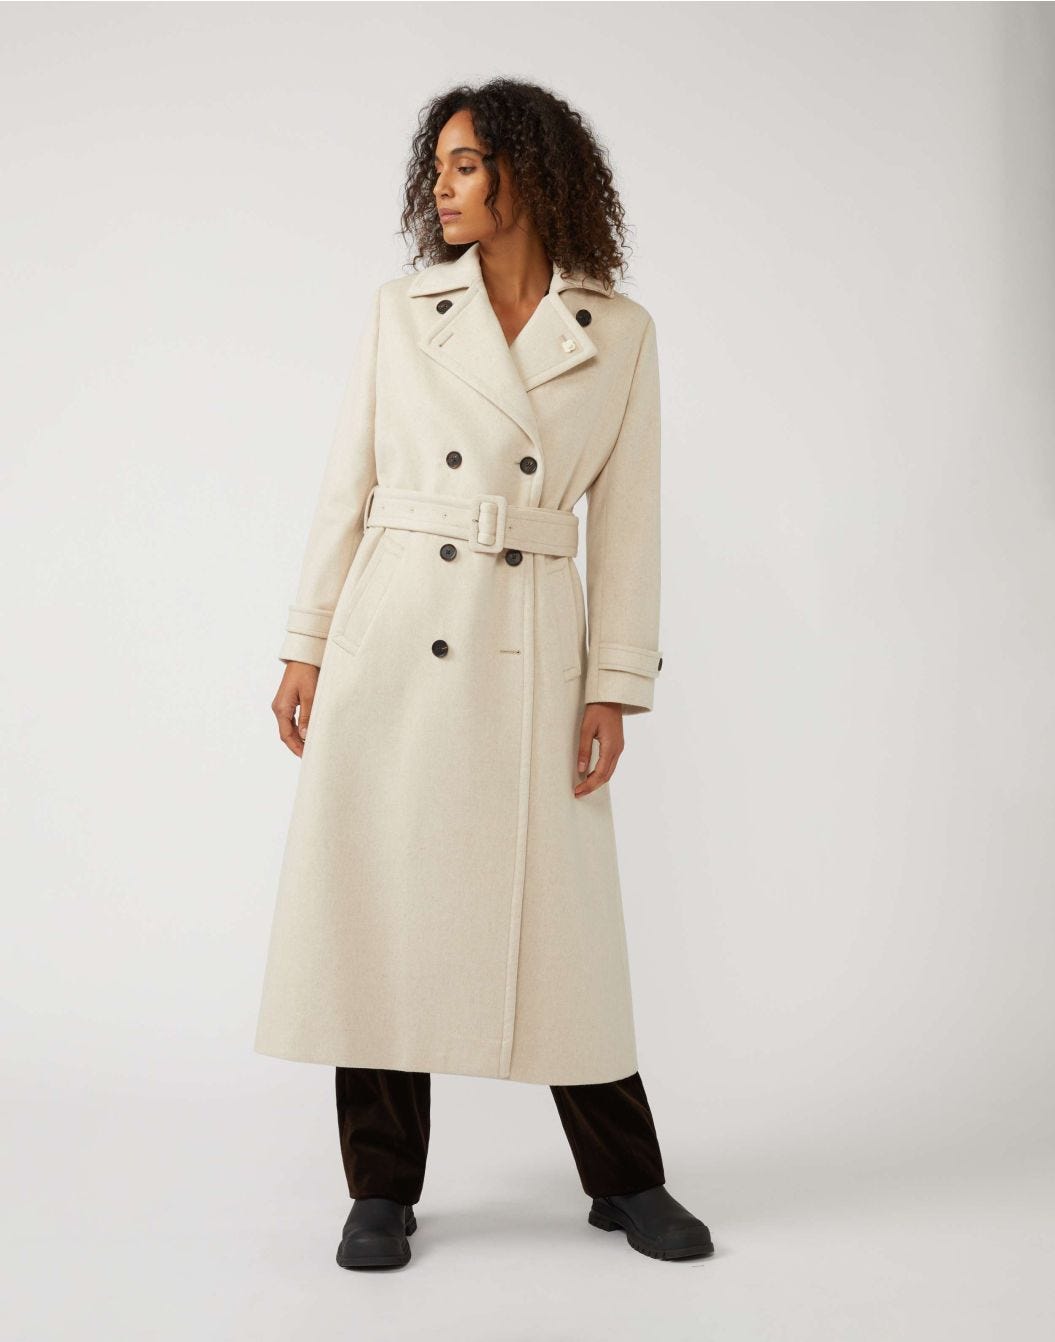 Belted wool trench coat in a natural hue